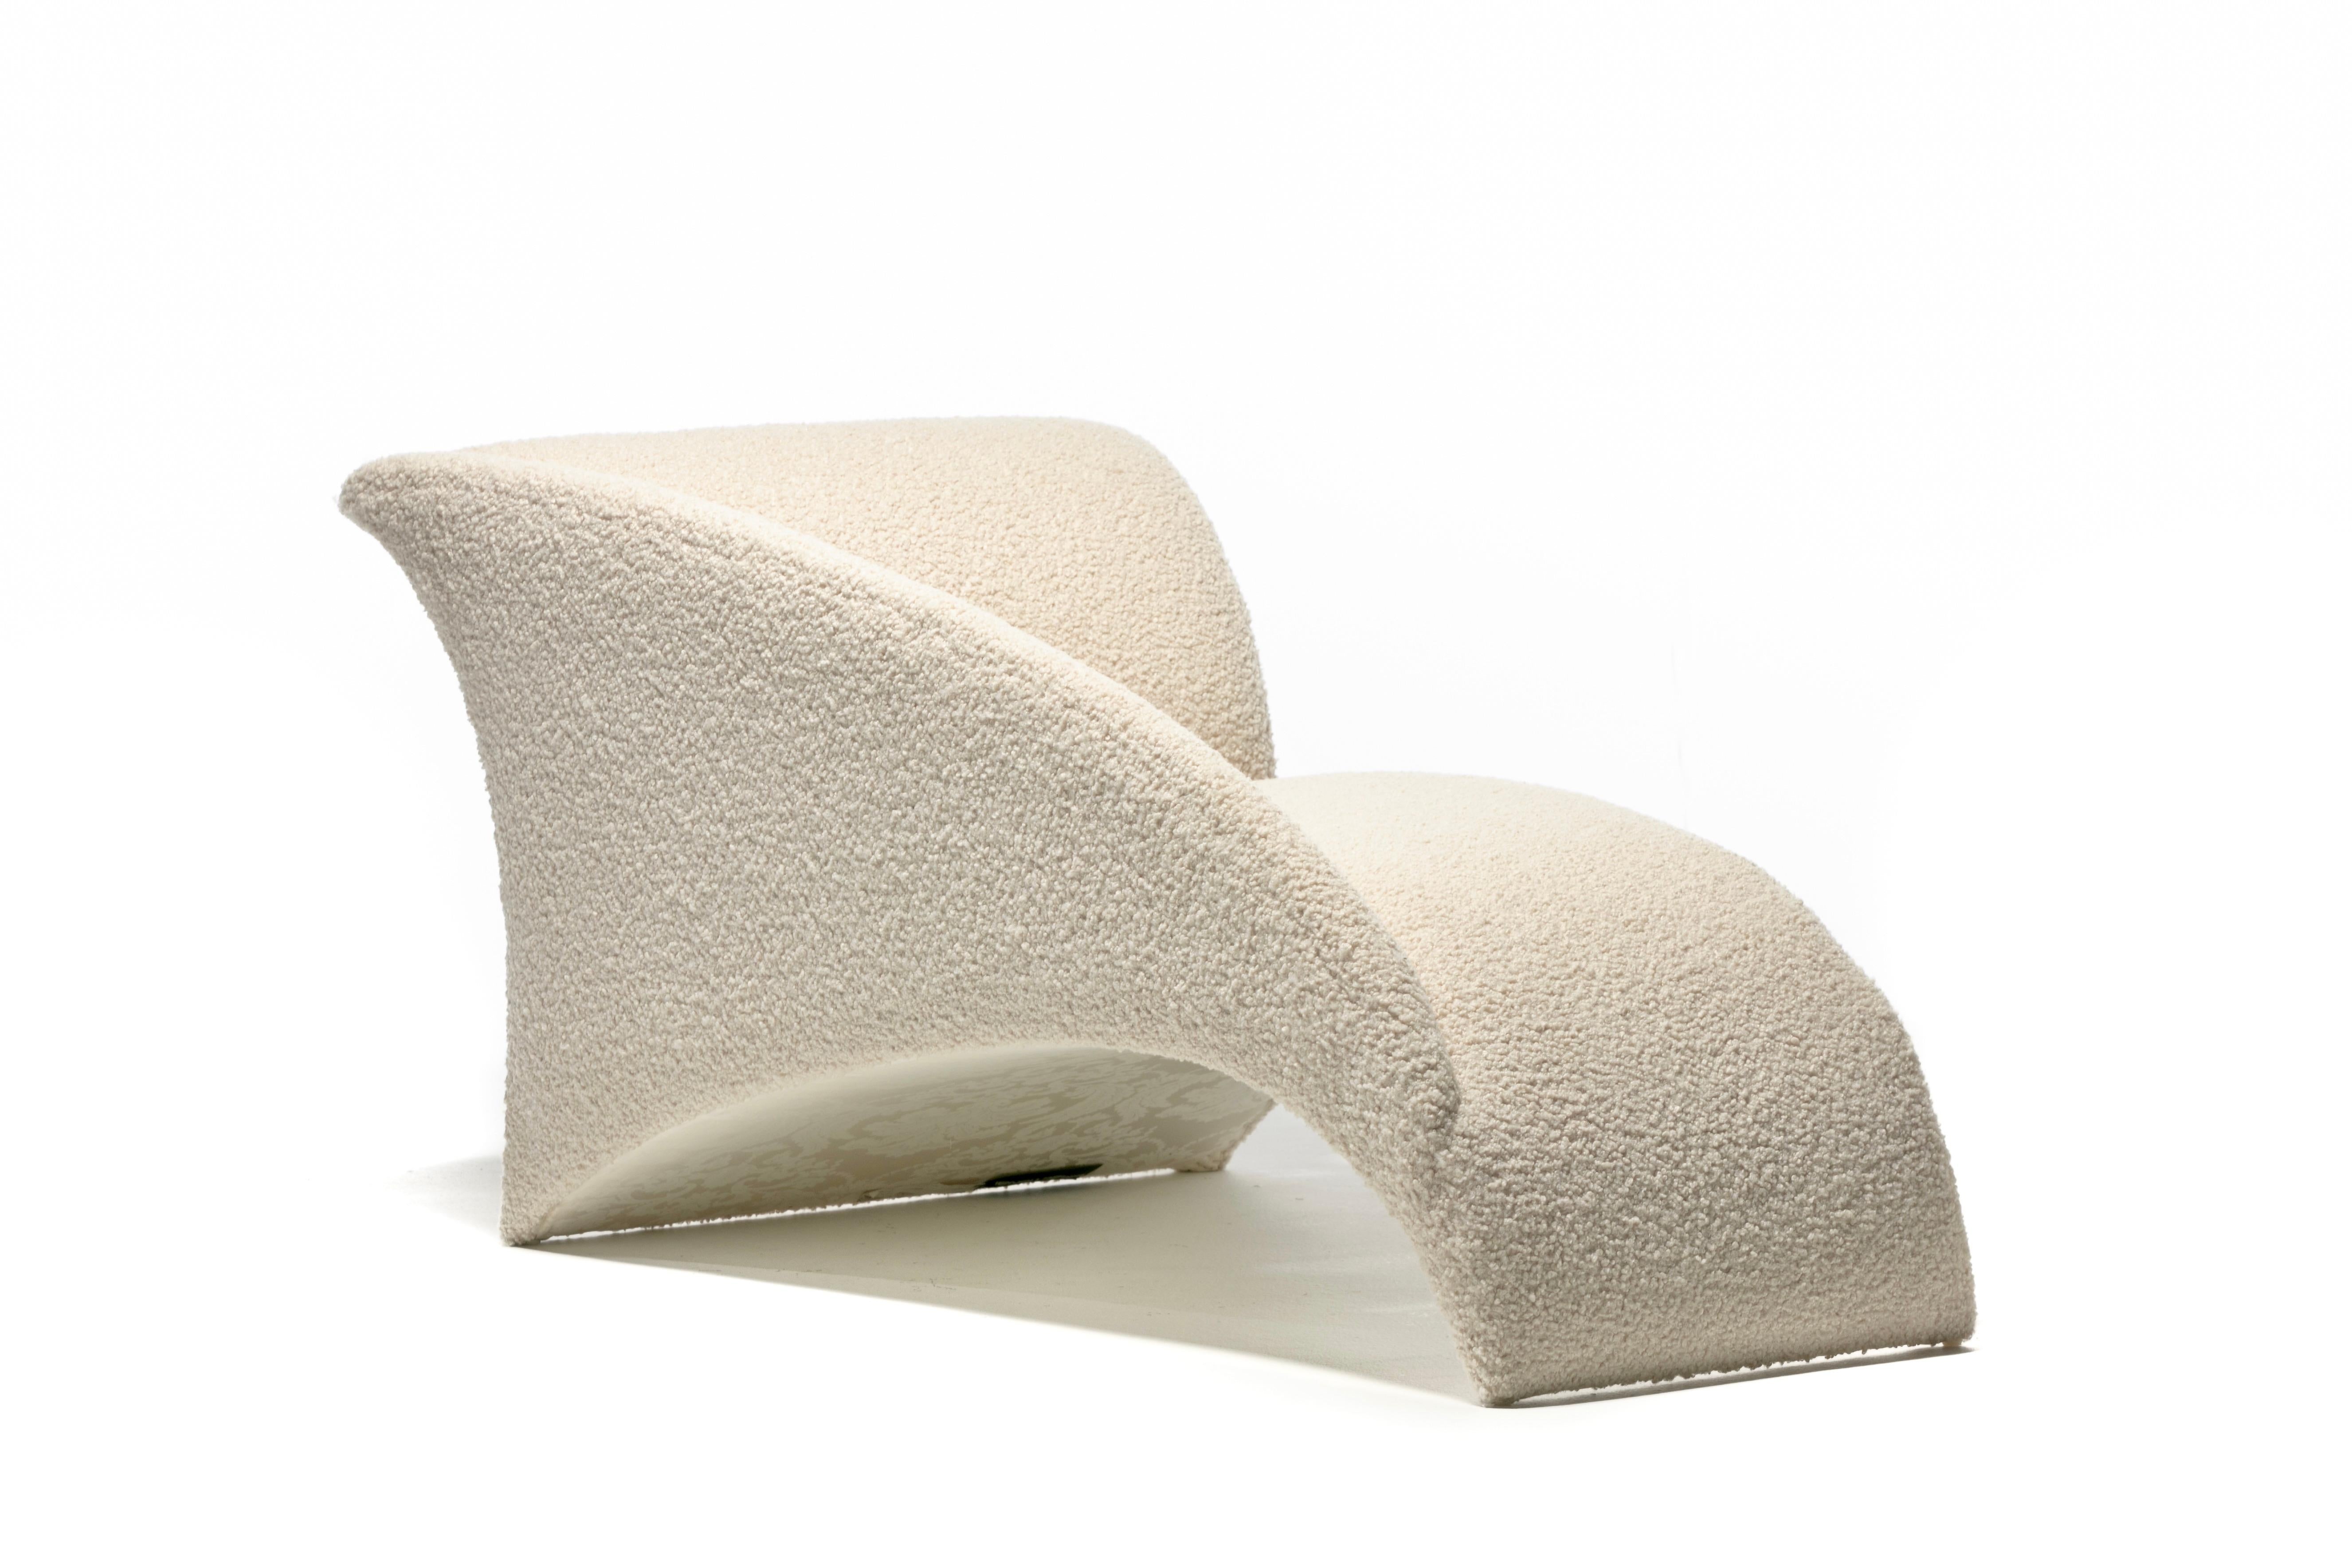 Vladimir Kagan Post Modern Marilyn Chaise Lounge in Ivory White Bouclé c. 1986 For Sale 2